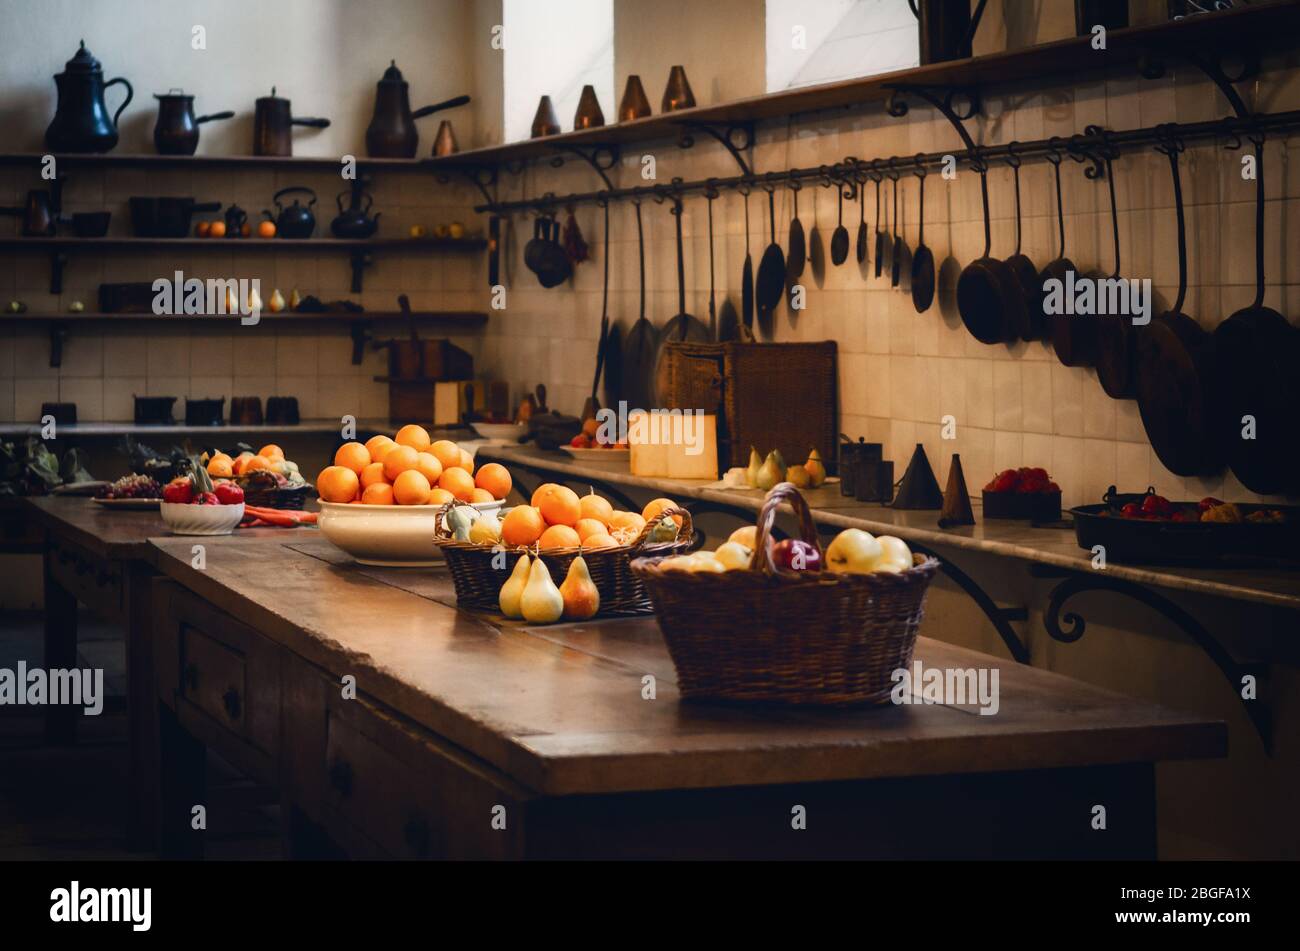 antique XIX century old kitchen with tools, pans, pots and food ingredients all over che benches and tables Stock Photo